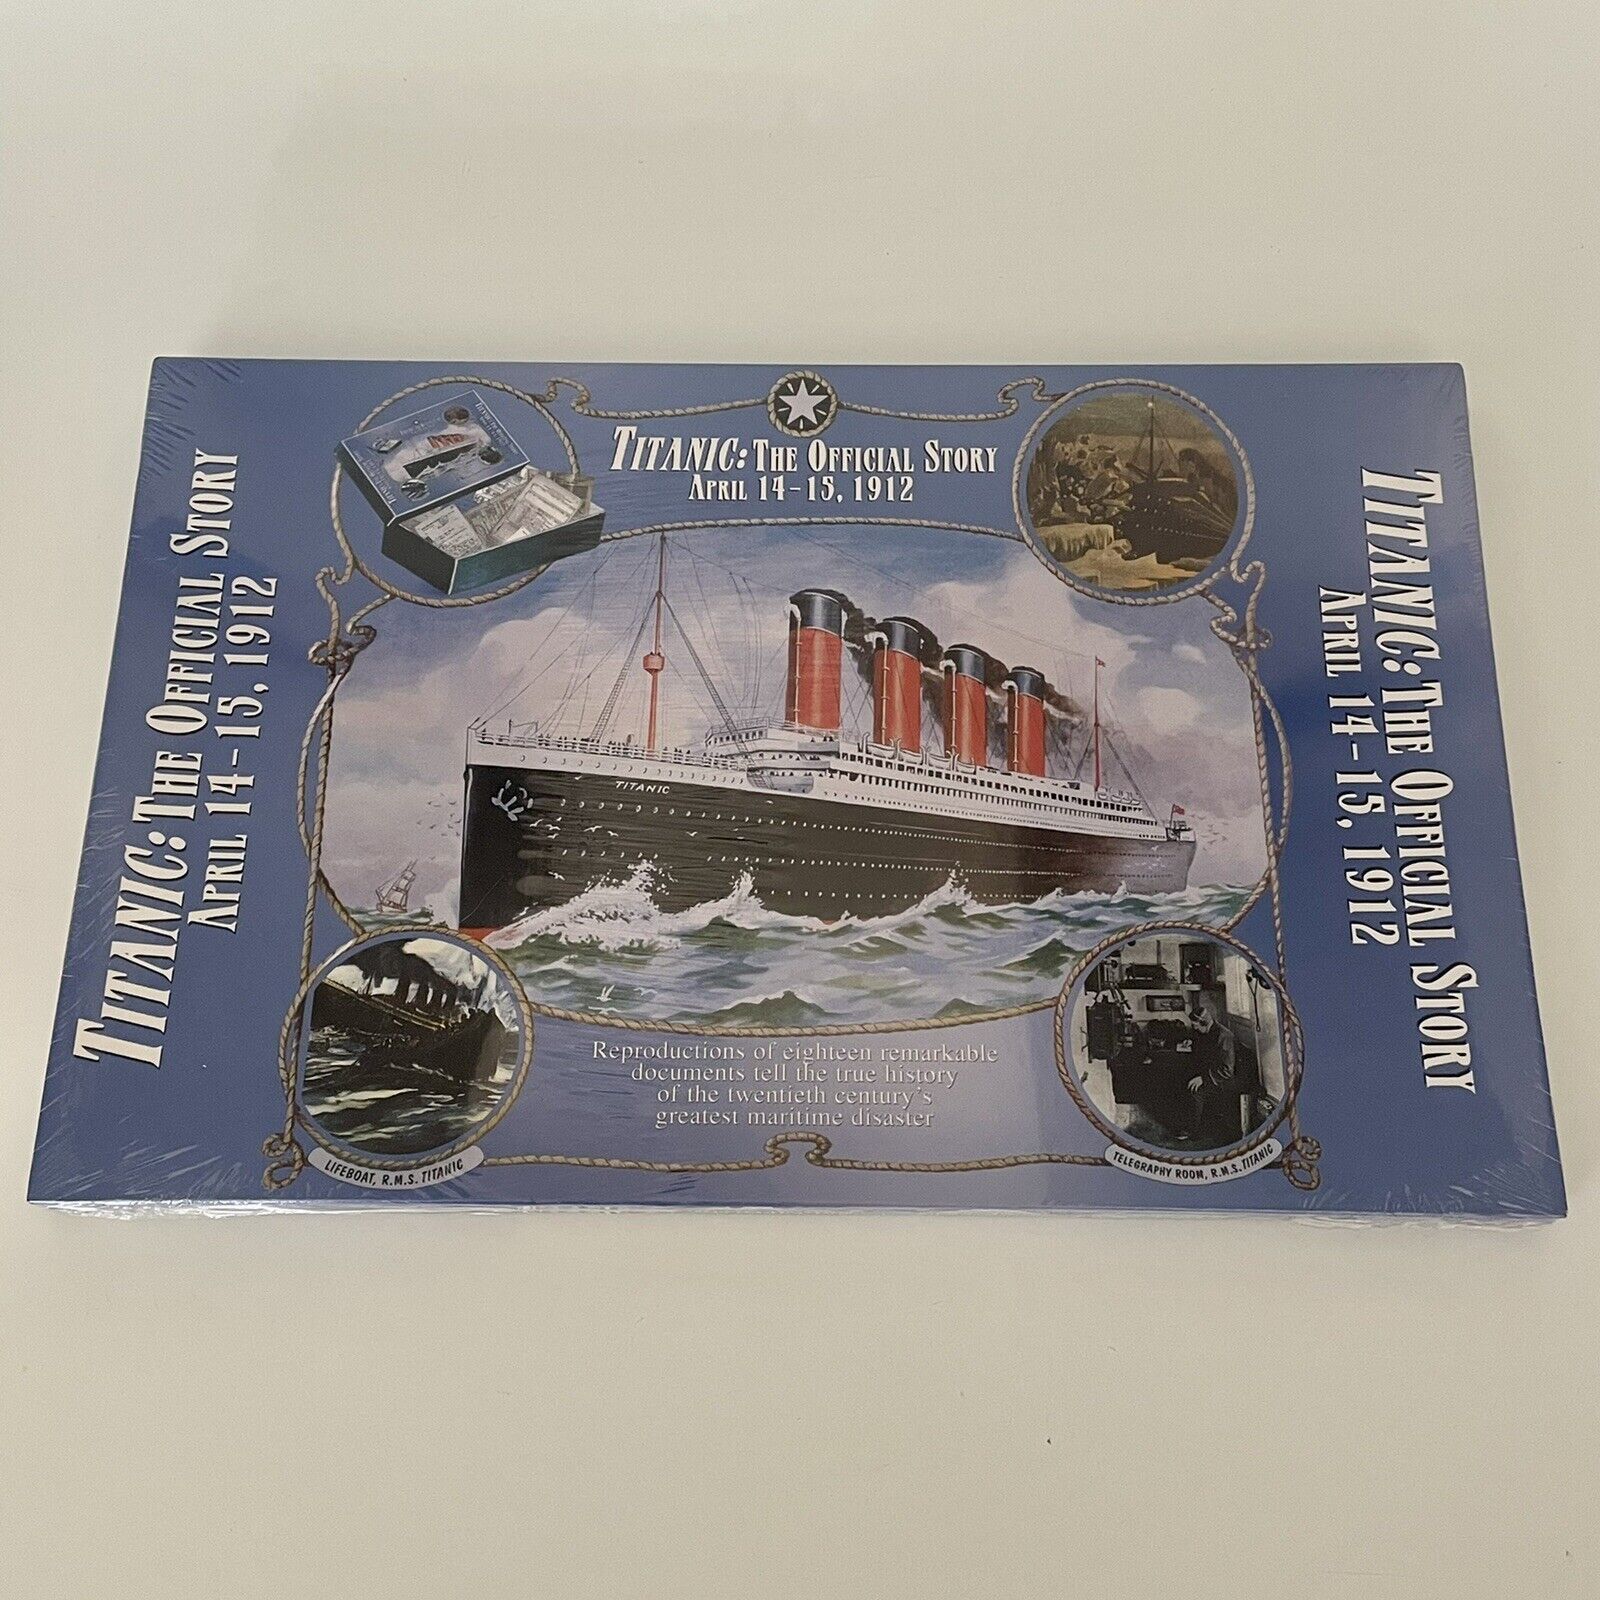 Titanic The Official Story April 14-15 1912. Brand New And Sealed